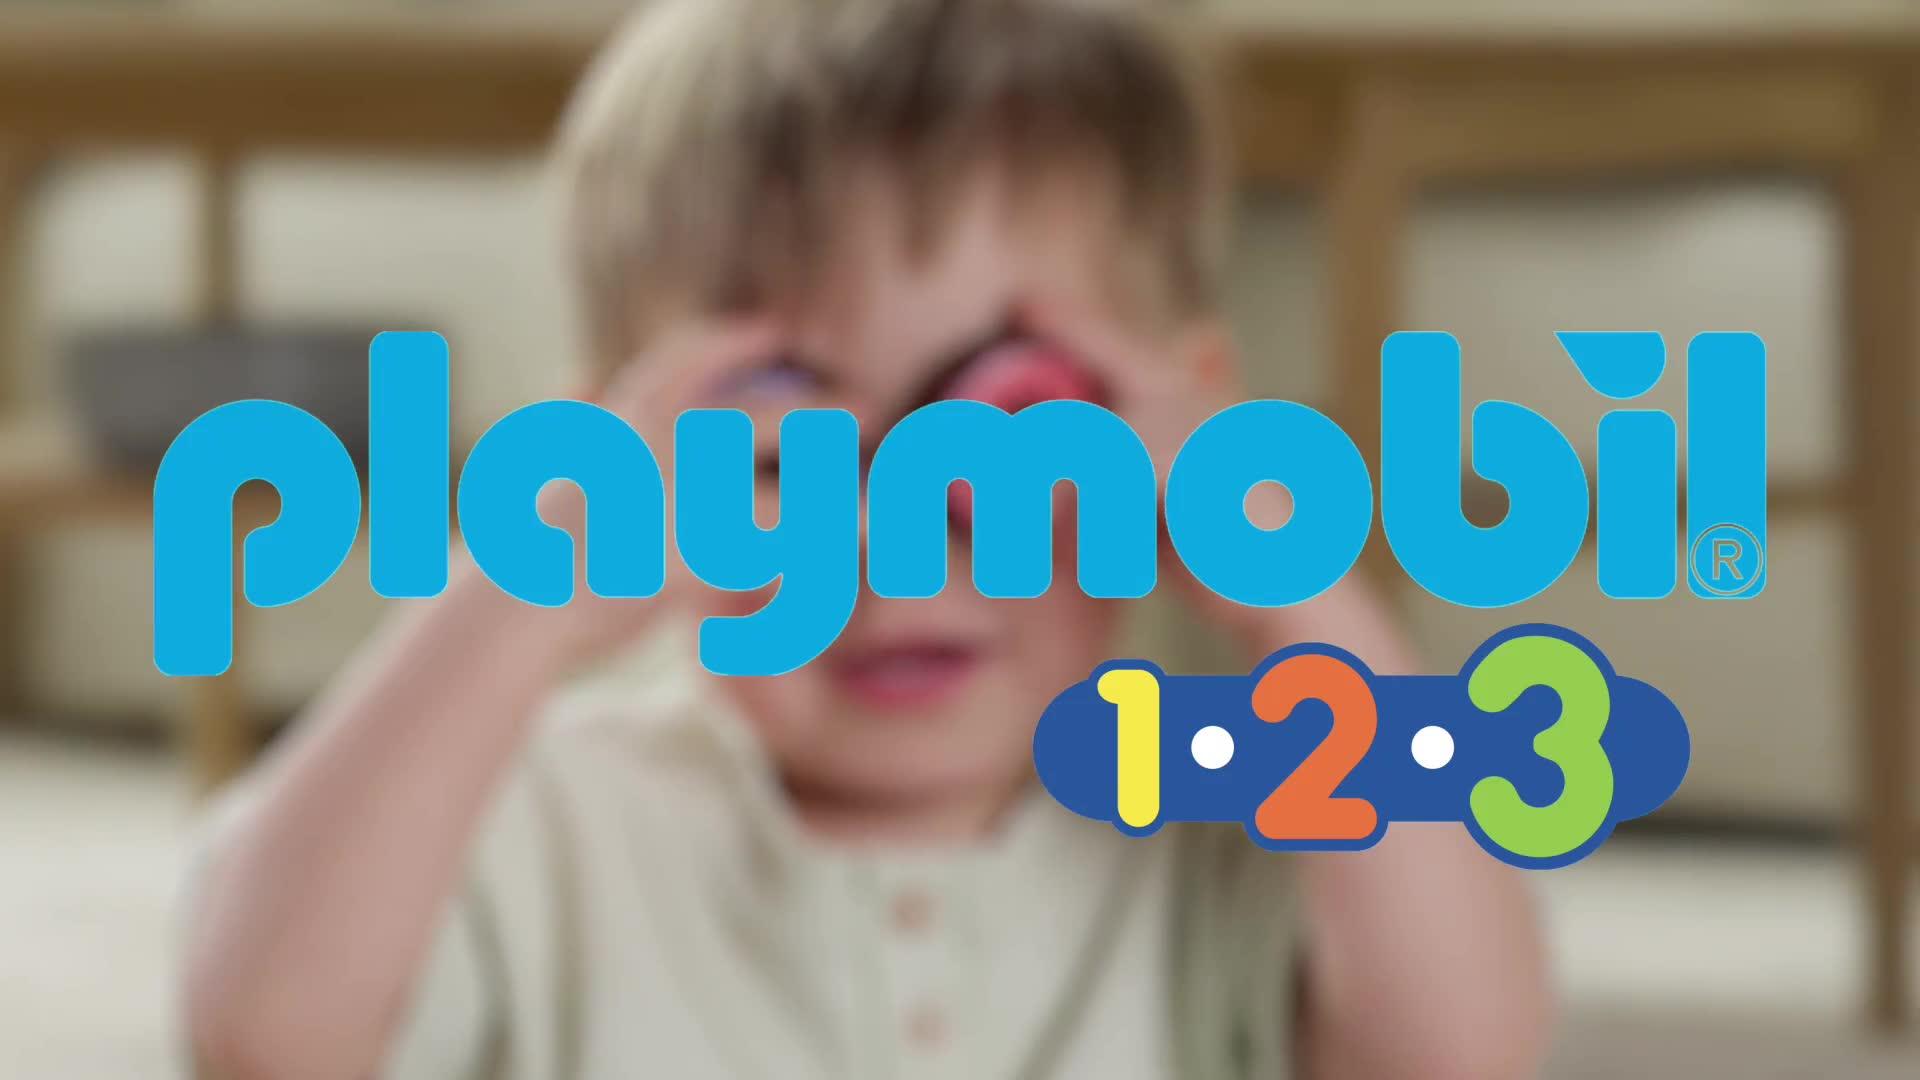 Playmobil 1.2.3 - Ma maternelle portable - 70399 - 15 Parties